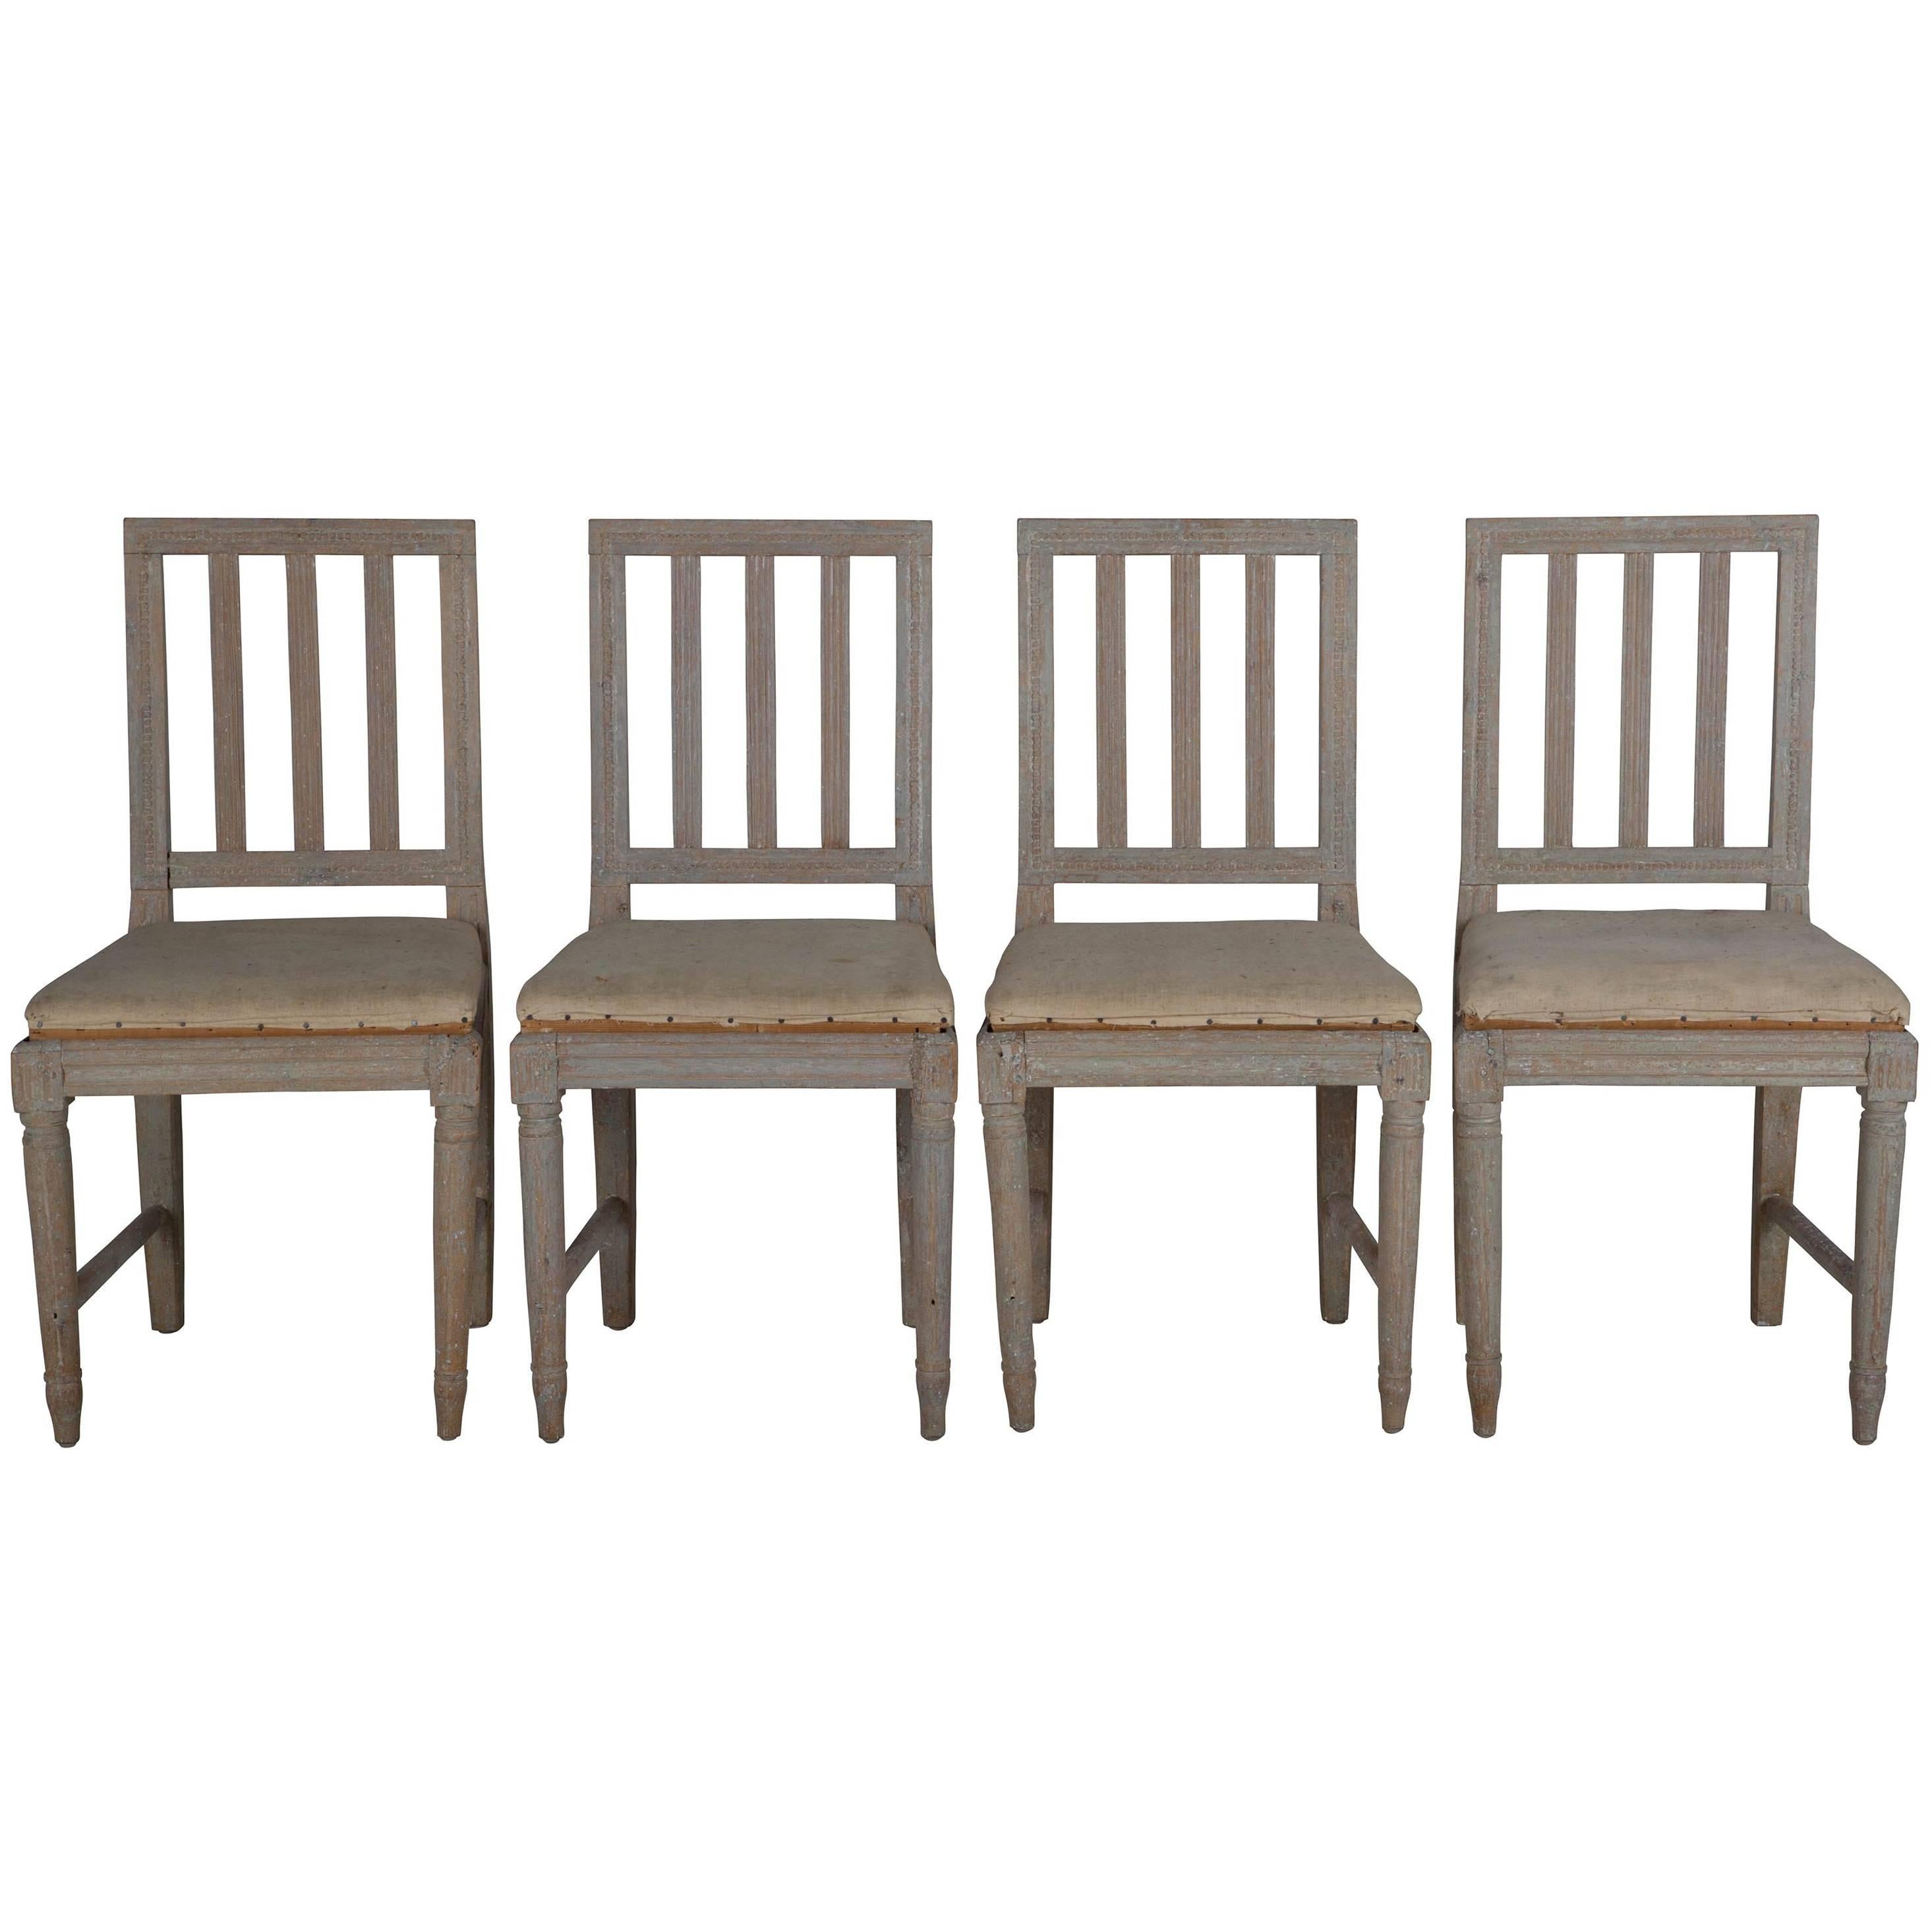 Four Painted Gustavian Dining Chairs